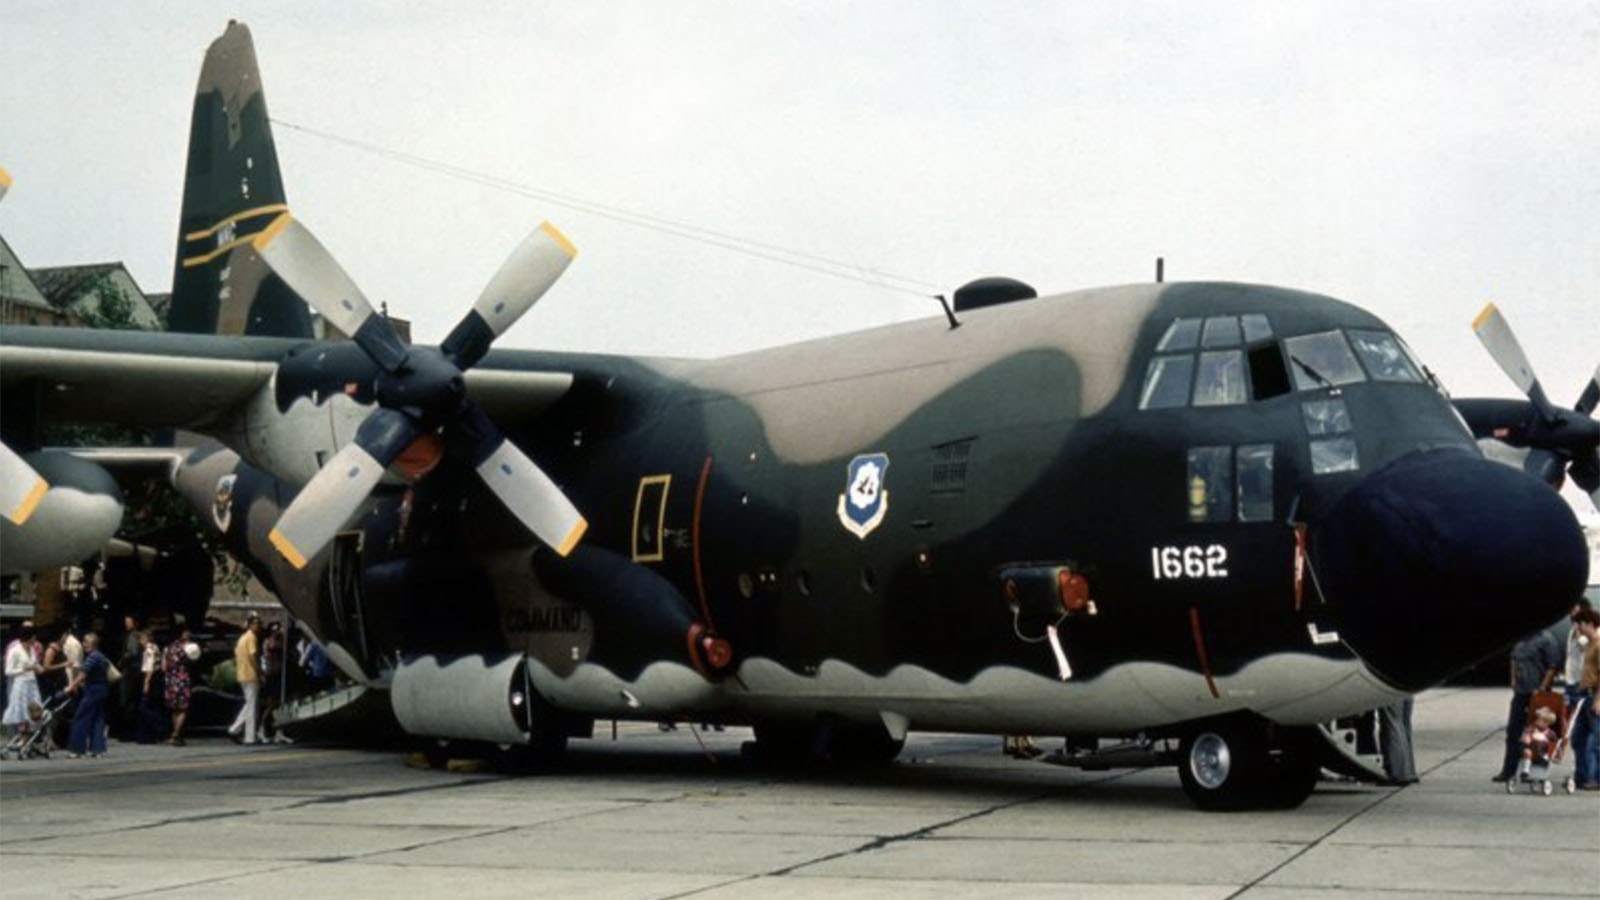 The C-130 was first put into service in 1976.